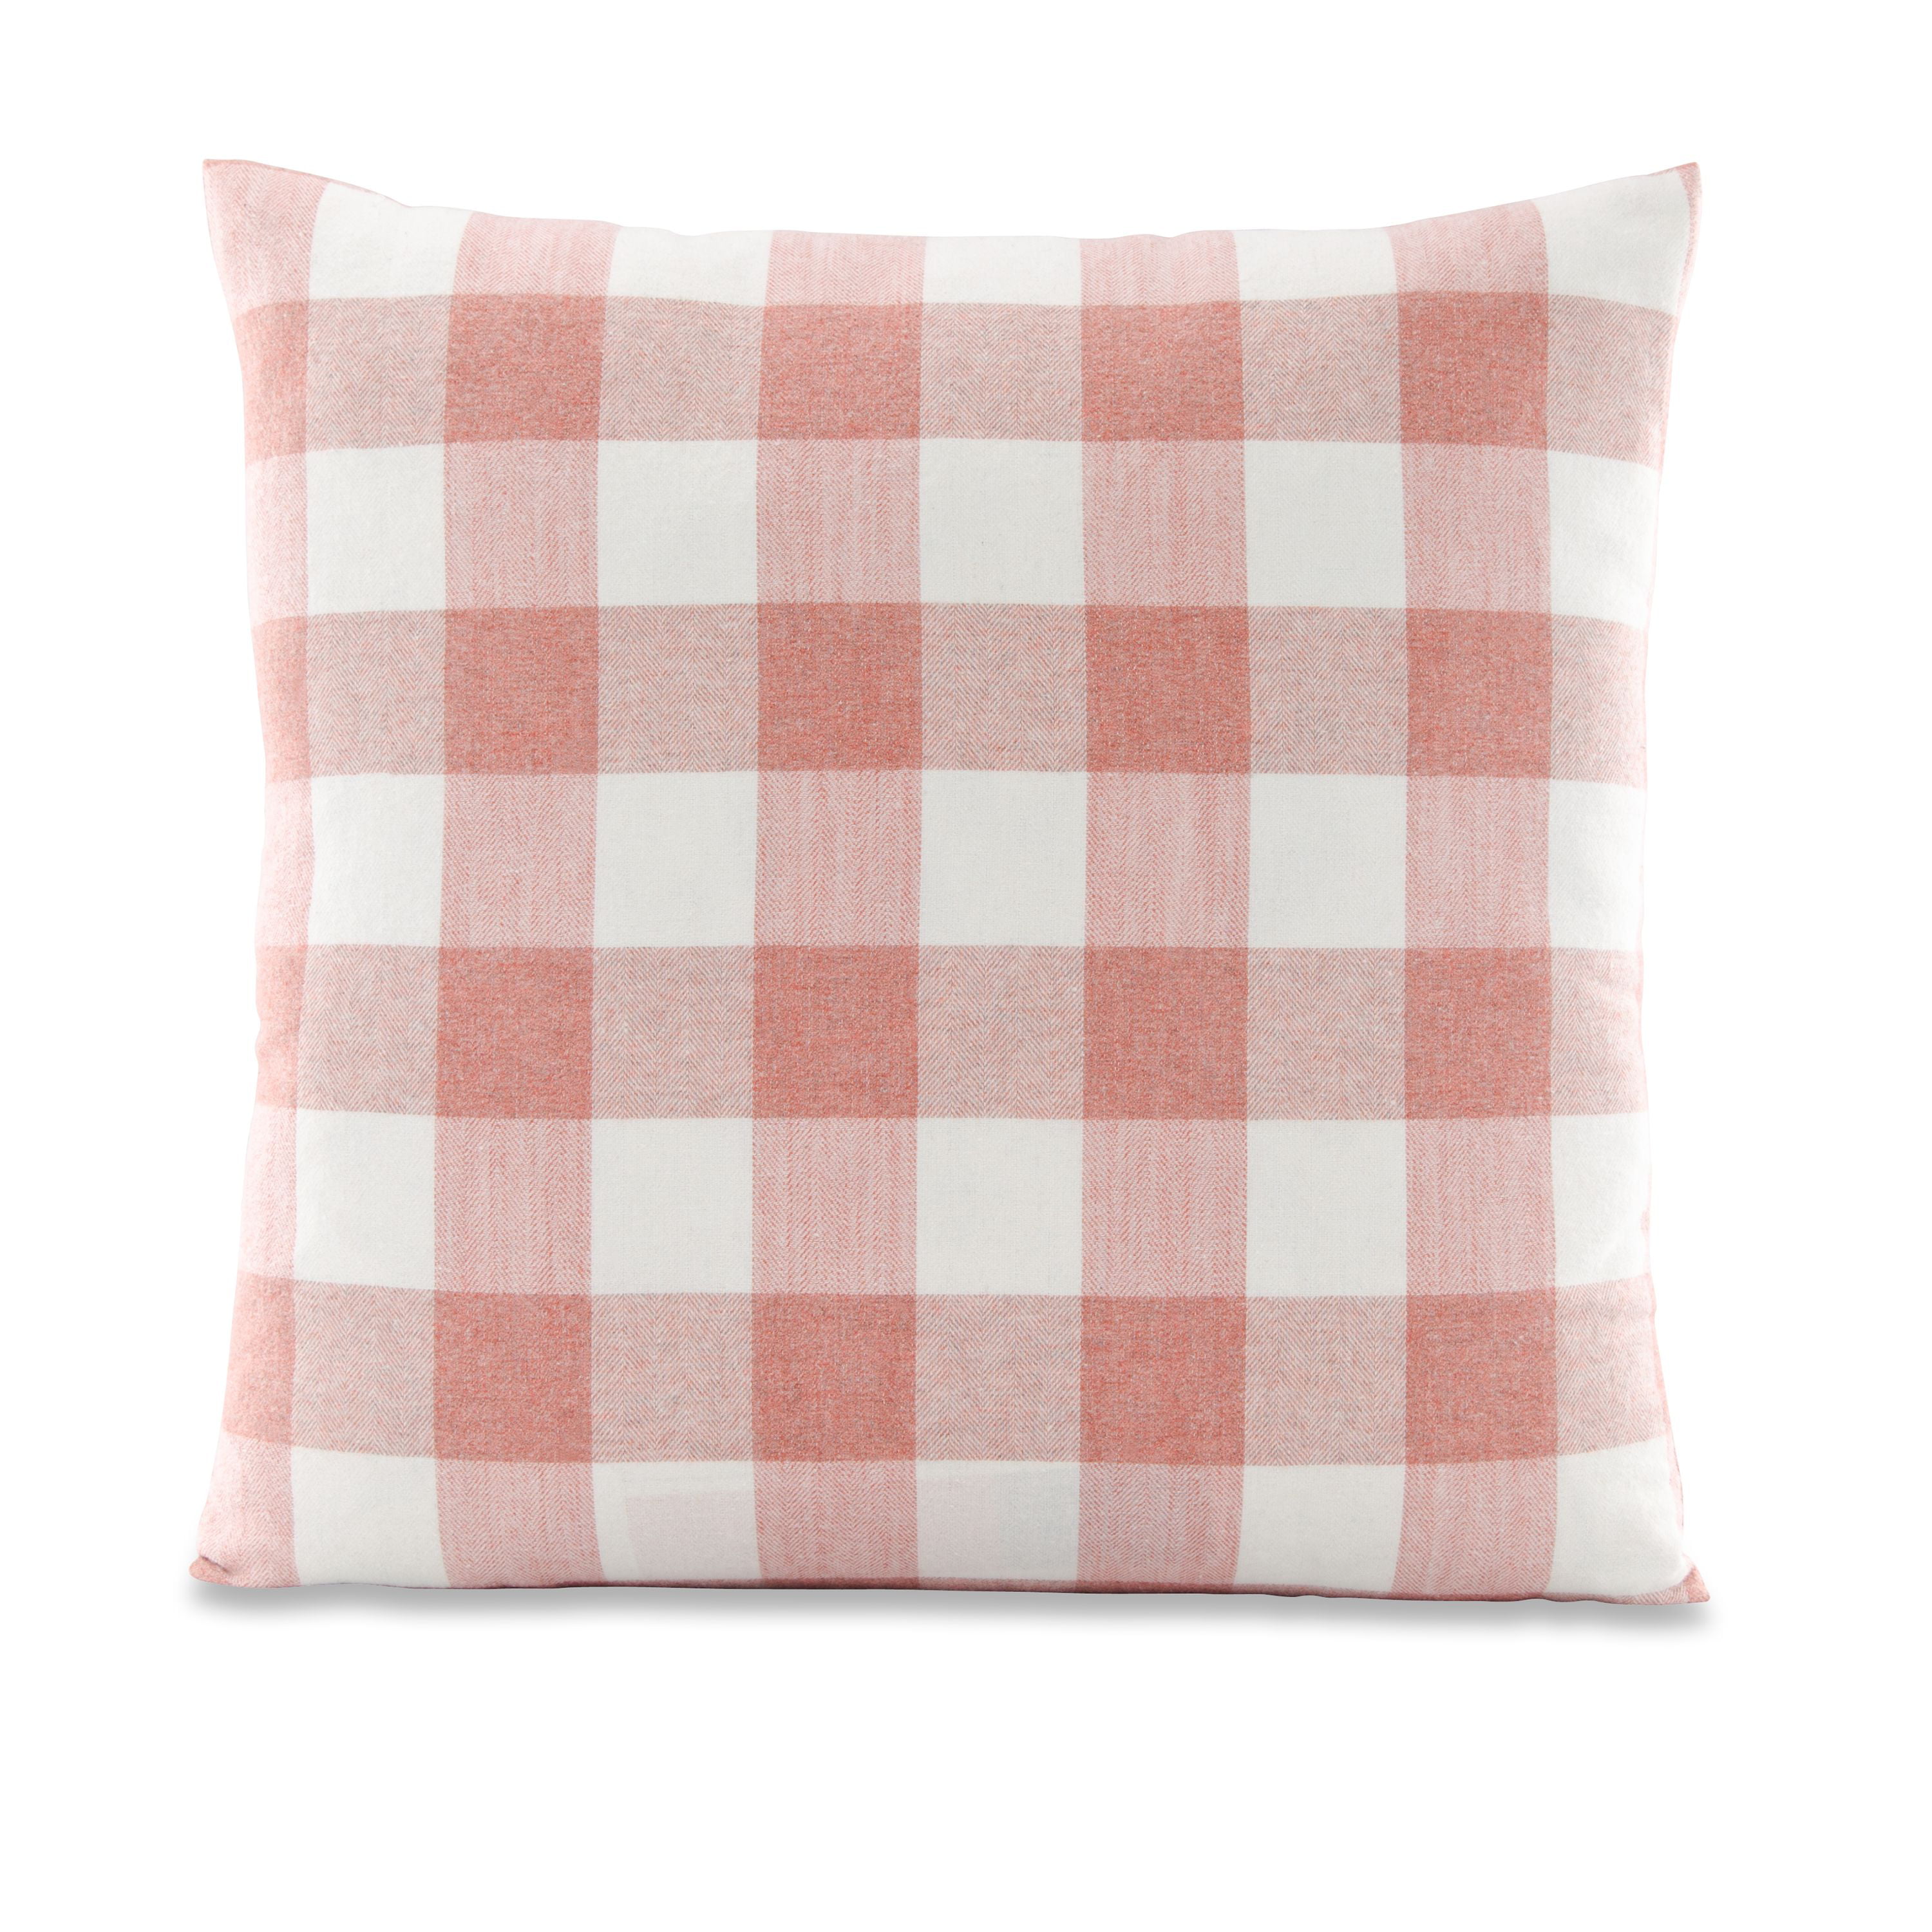 Pink LOVE Plaid & Color Throw Pillow Multicolor 18x18 